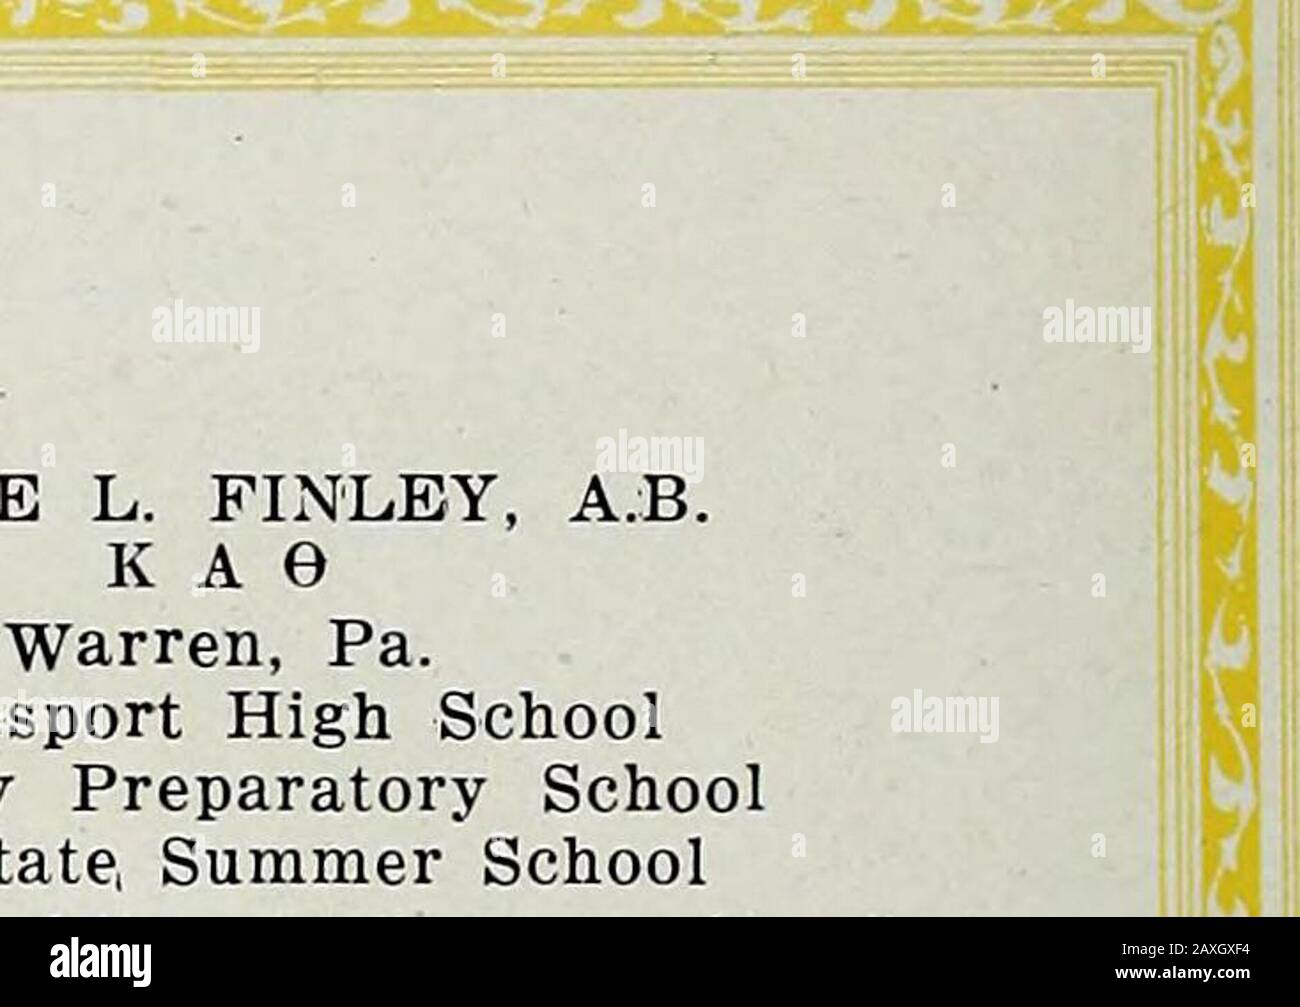 The Kaldron . PHOEBE L. FINLEY, A.B. K A 9 Warren, Pa. McKeesport High School Allegheny Preparatory School Penn State, Summer School The hand that follows intellect can achieve. —Michael Angelo. German Club; Ossoli Literary Club; Student Council; Girls Tennis Association; Ten-nis Champion, 05; Skin and Bones. College records of fourteen years ago showus that Phoebe Finley was most active inschool life. Since then she has been busyteaching school. We are mighty proud tohave her in 1922. Proud of her display ofintelligence which caused her to pass by allother classes and select ours for her own. Stock Photo